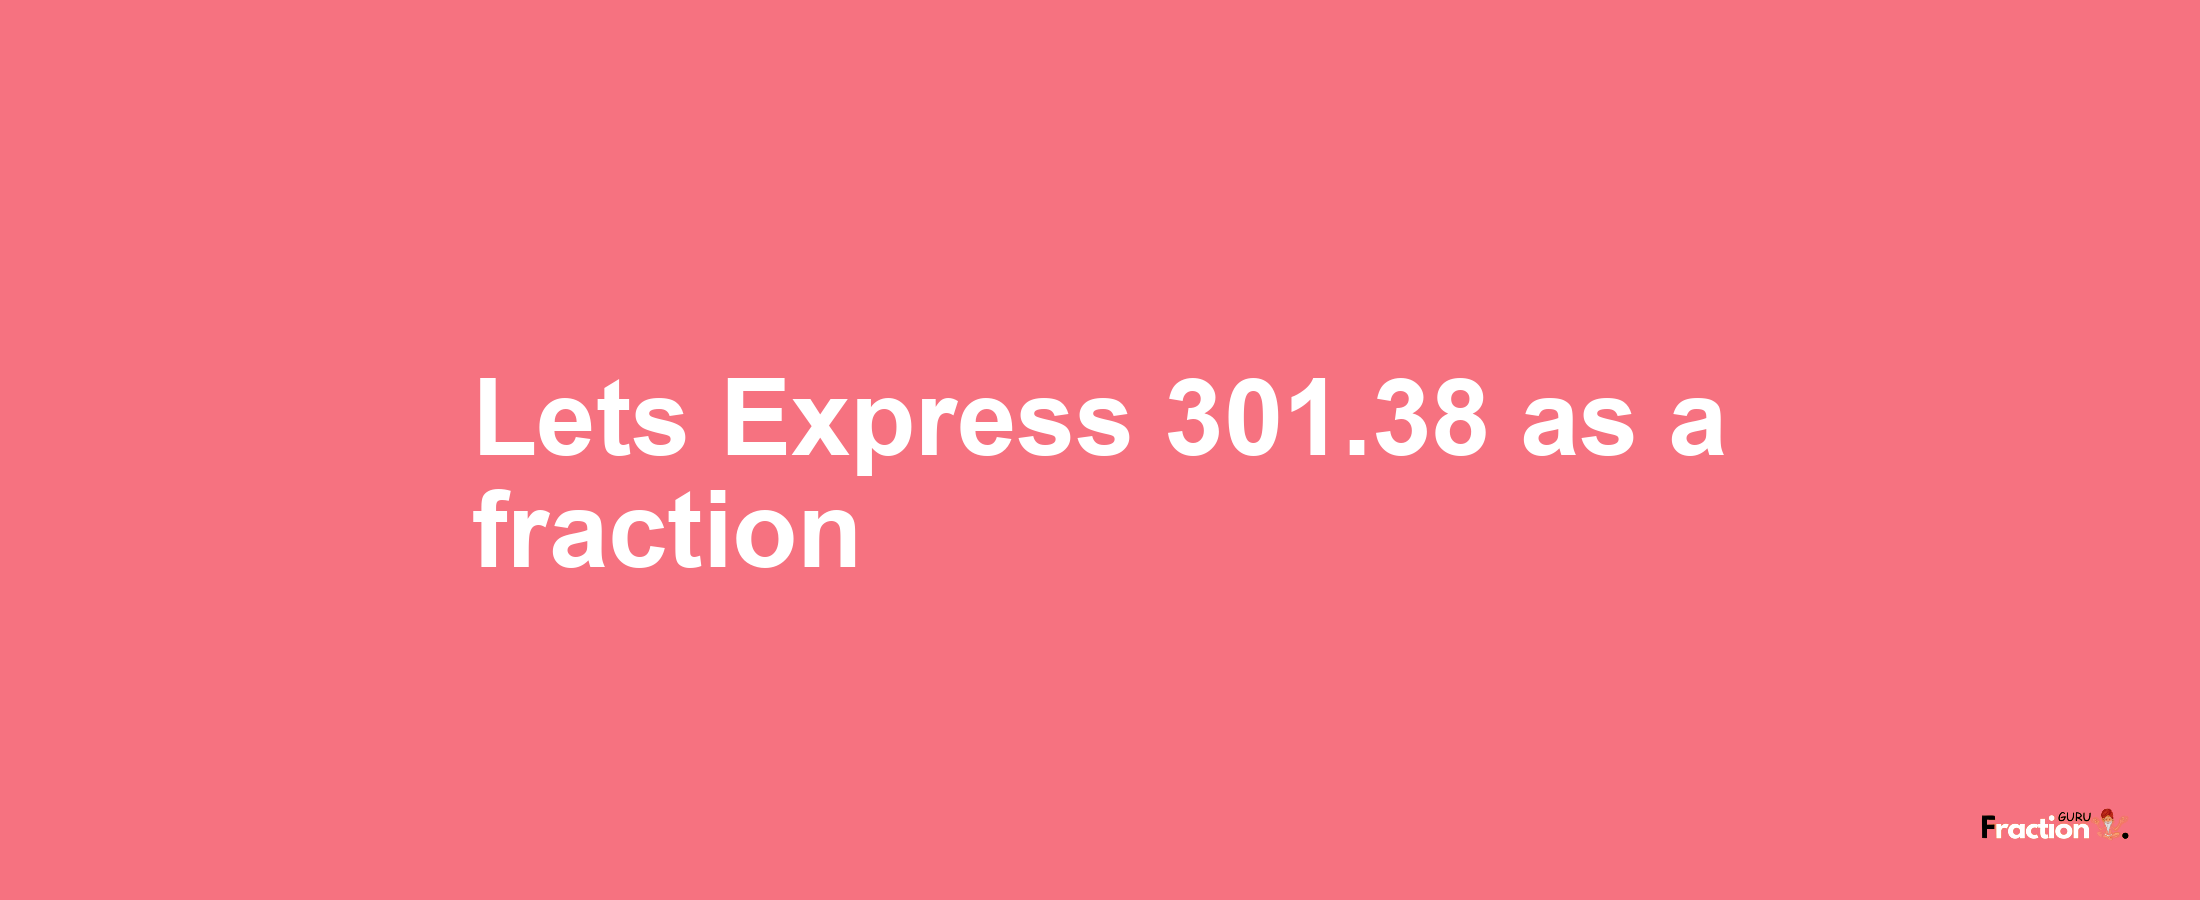 Lets Express 301.38 as afraction